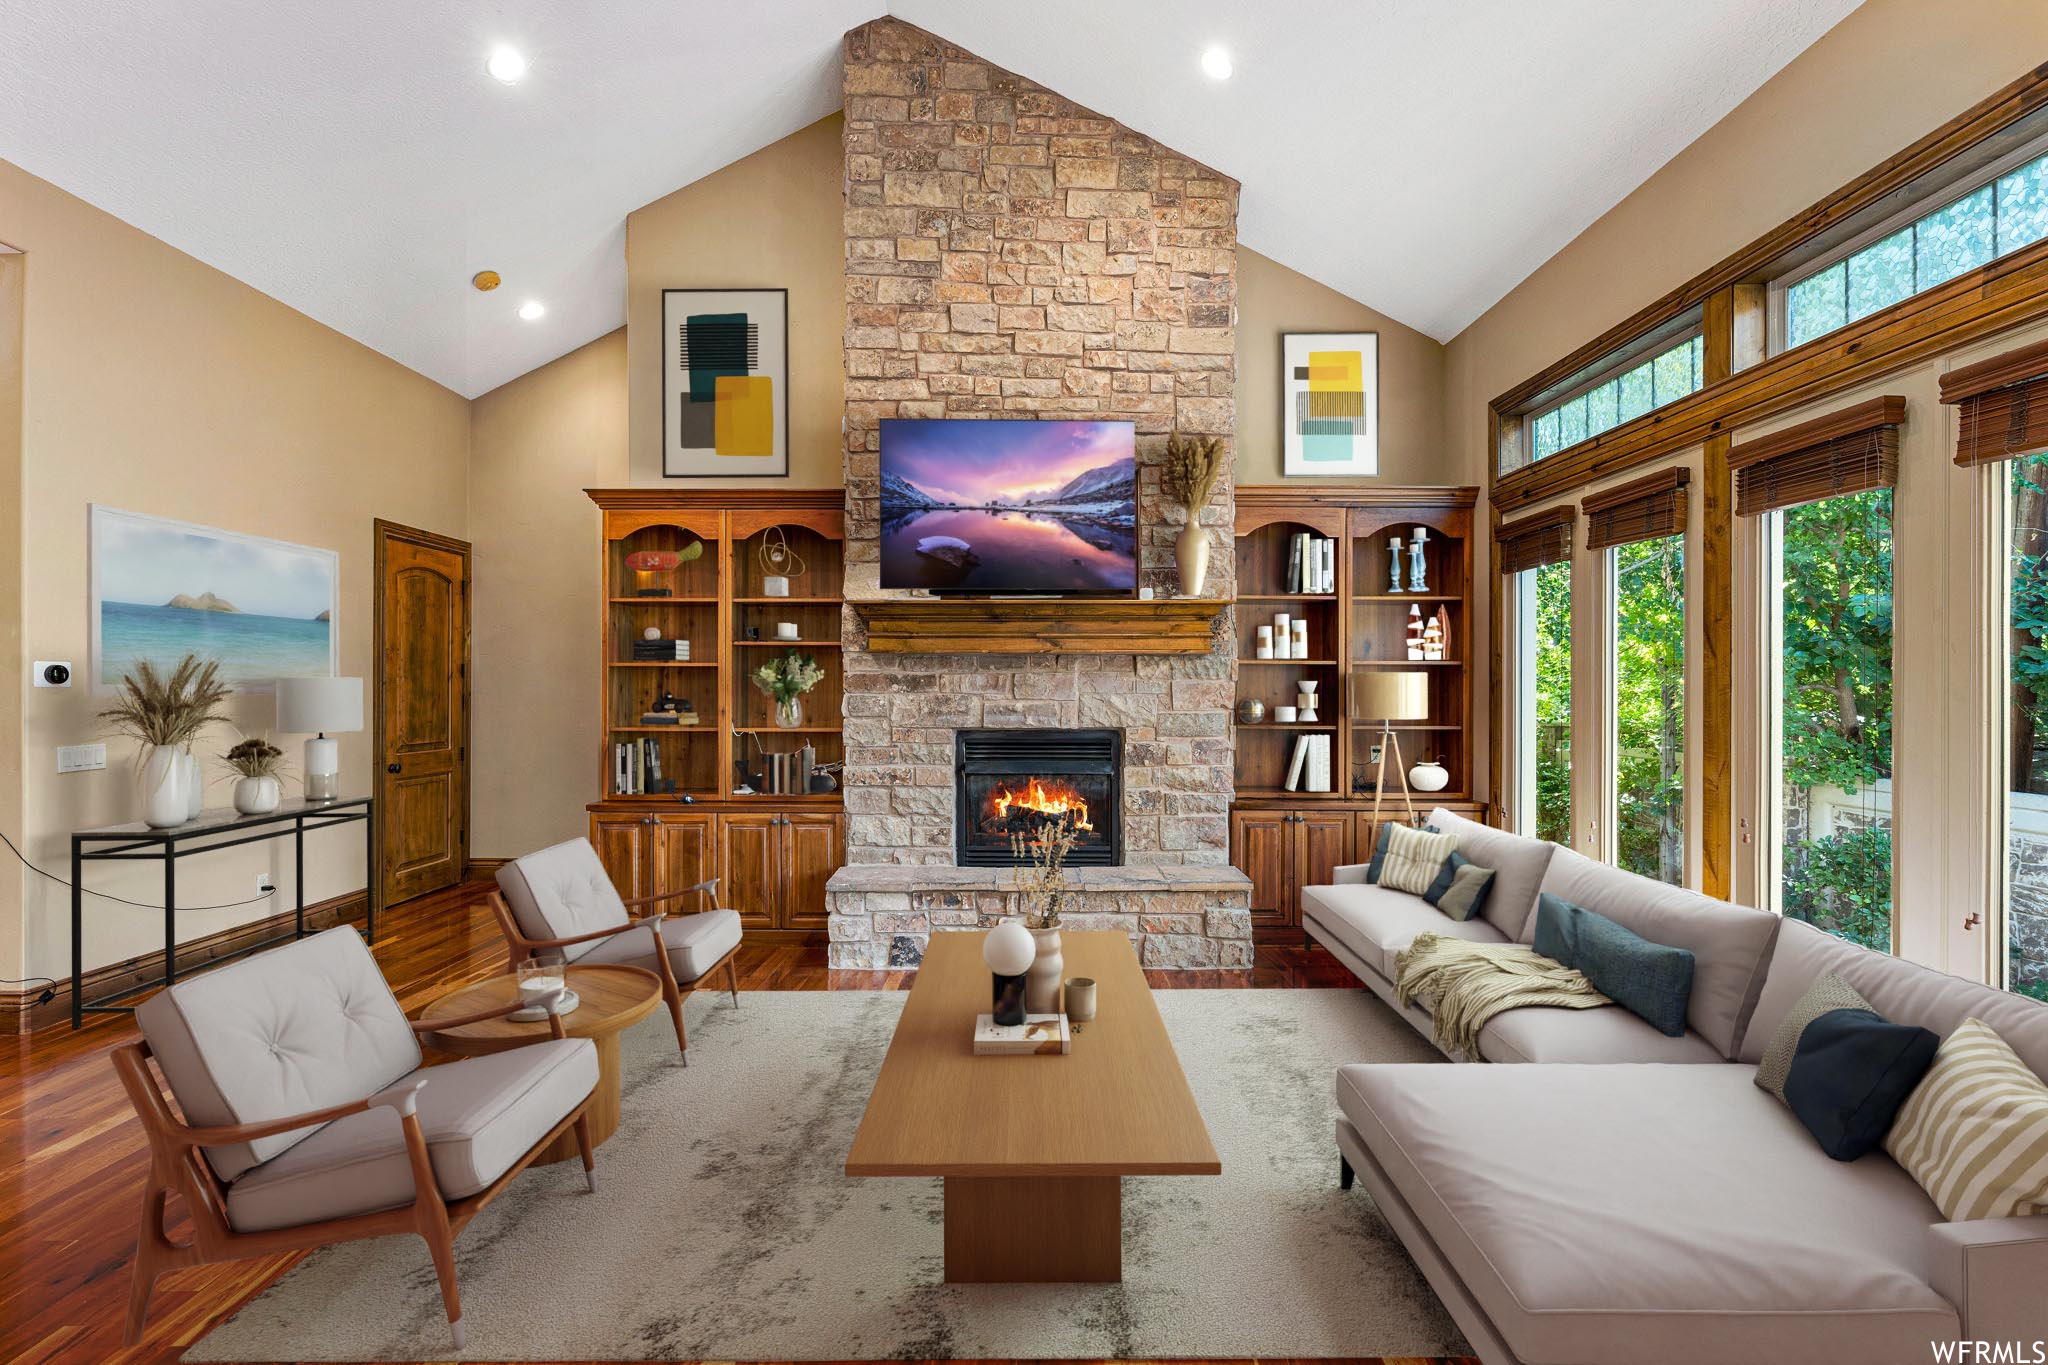 Furnished Living room with vaulted ceiling high, light hardwood floors, and a fireplace